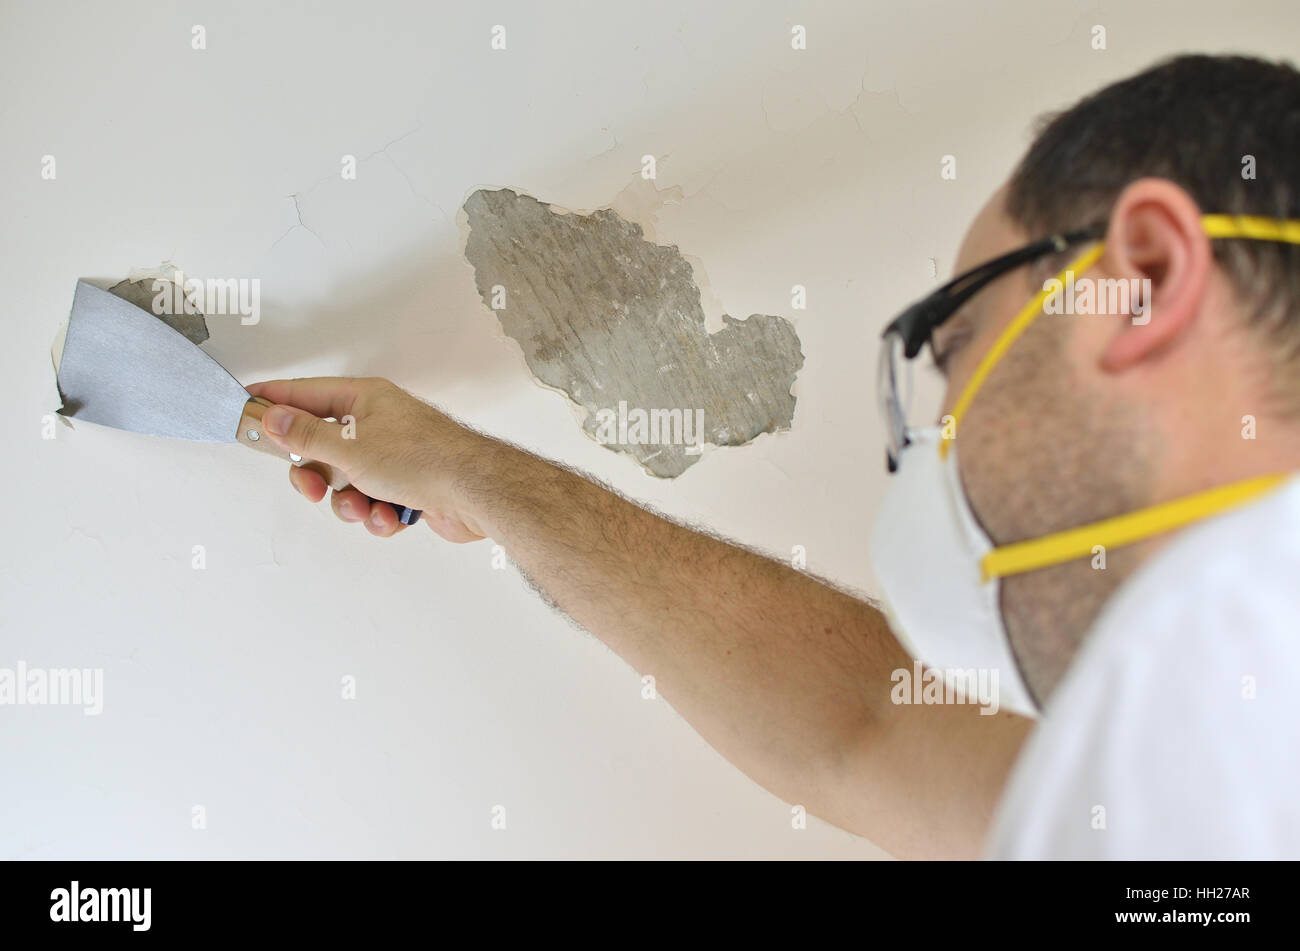 Man Holding A Plaster Spatula Peeling A Ceiling Preparing It For